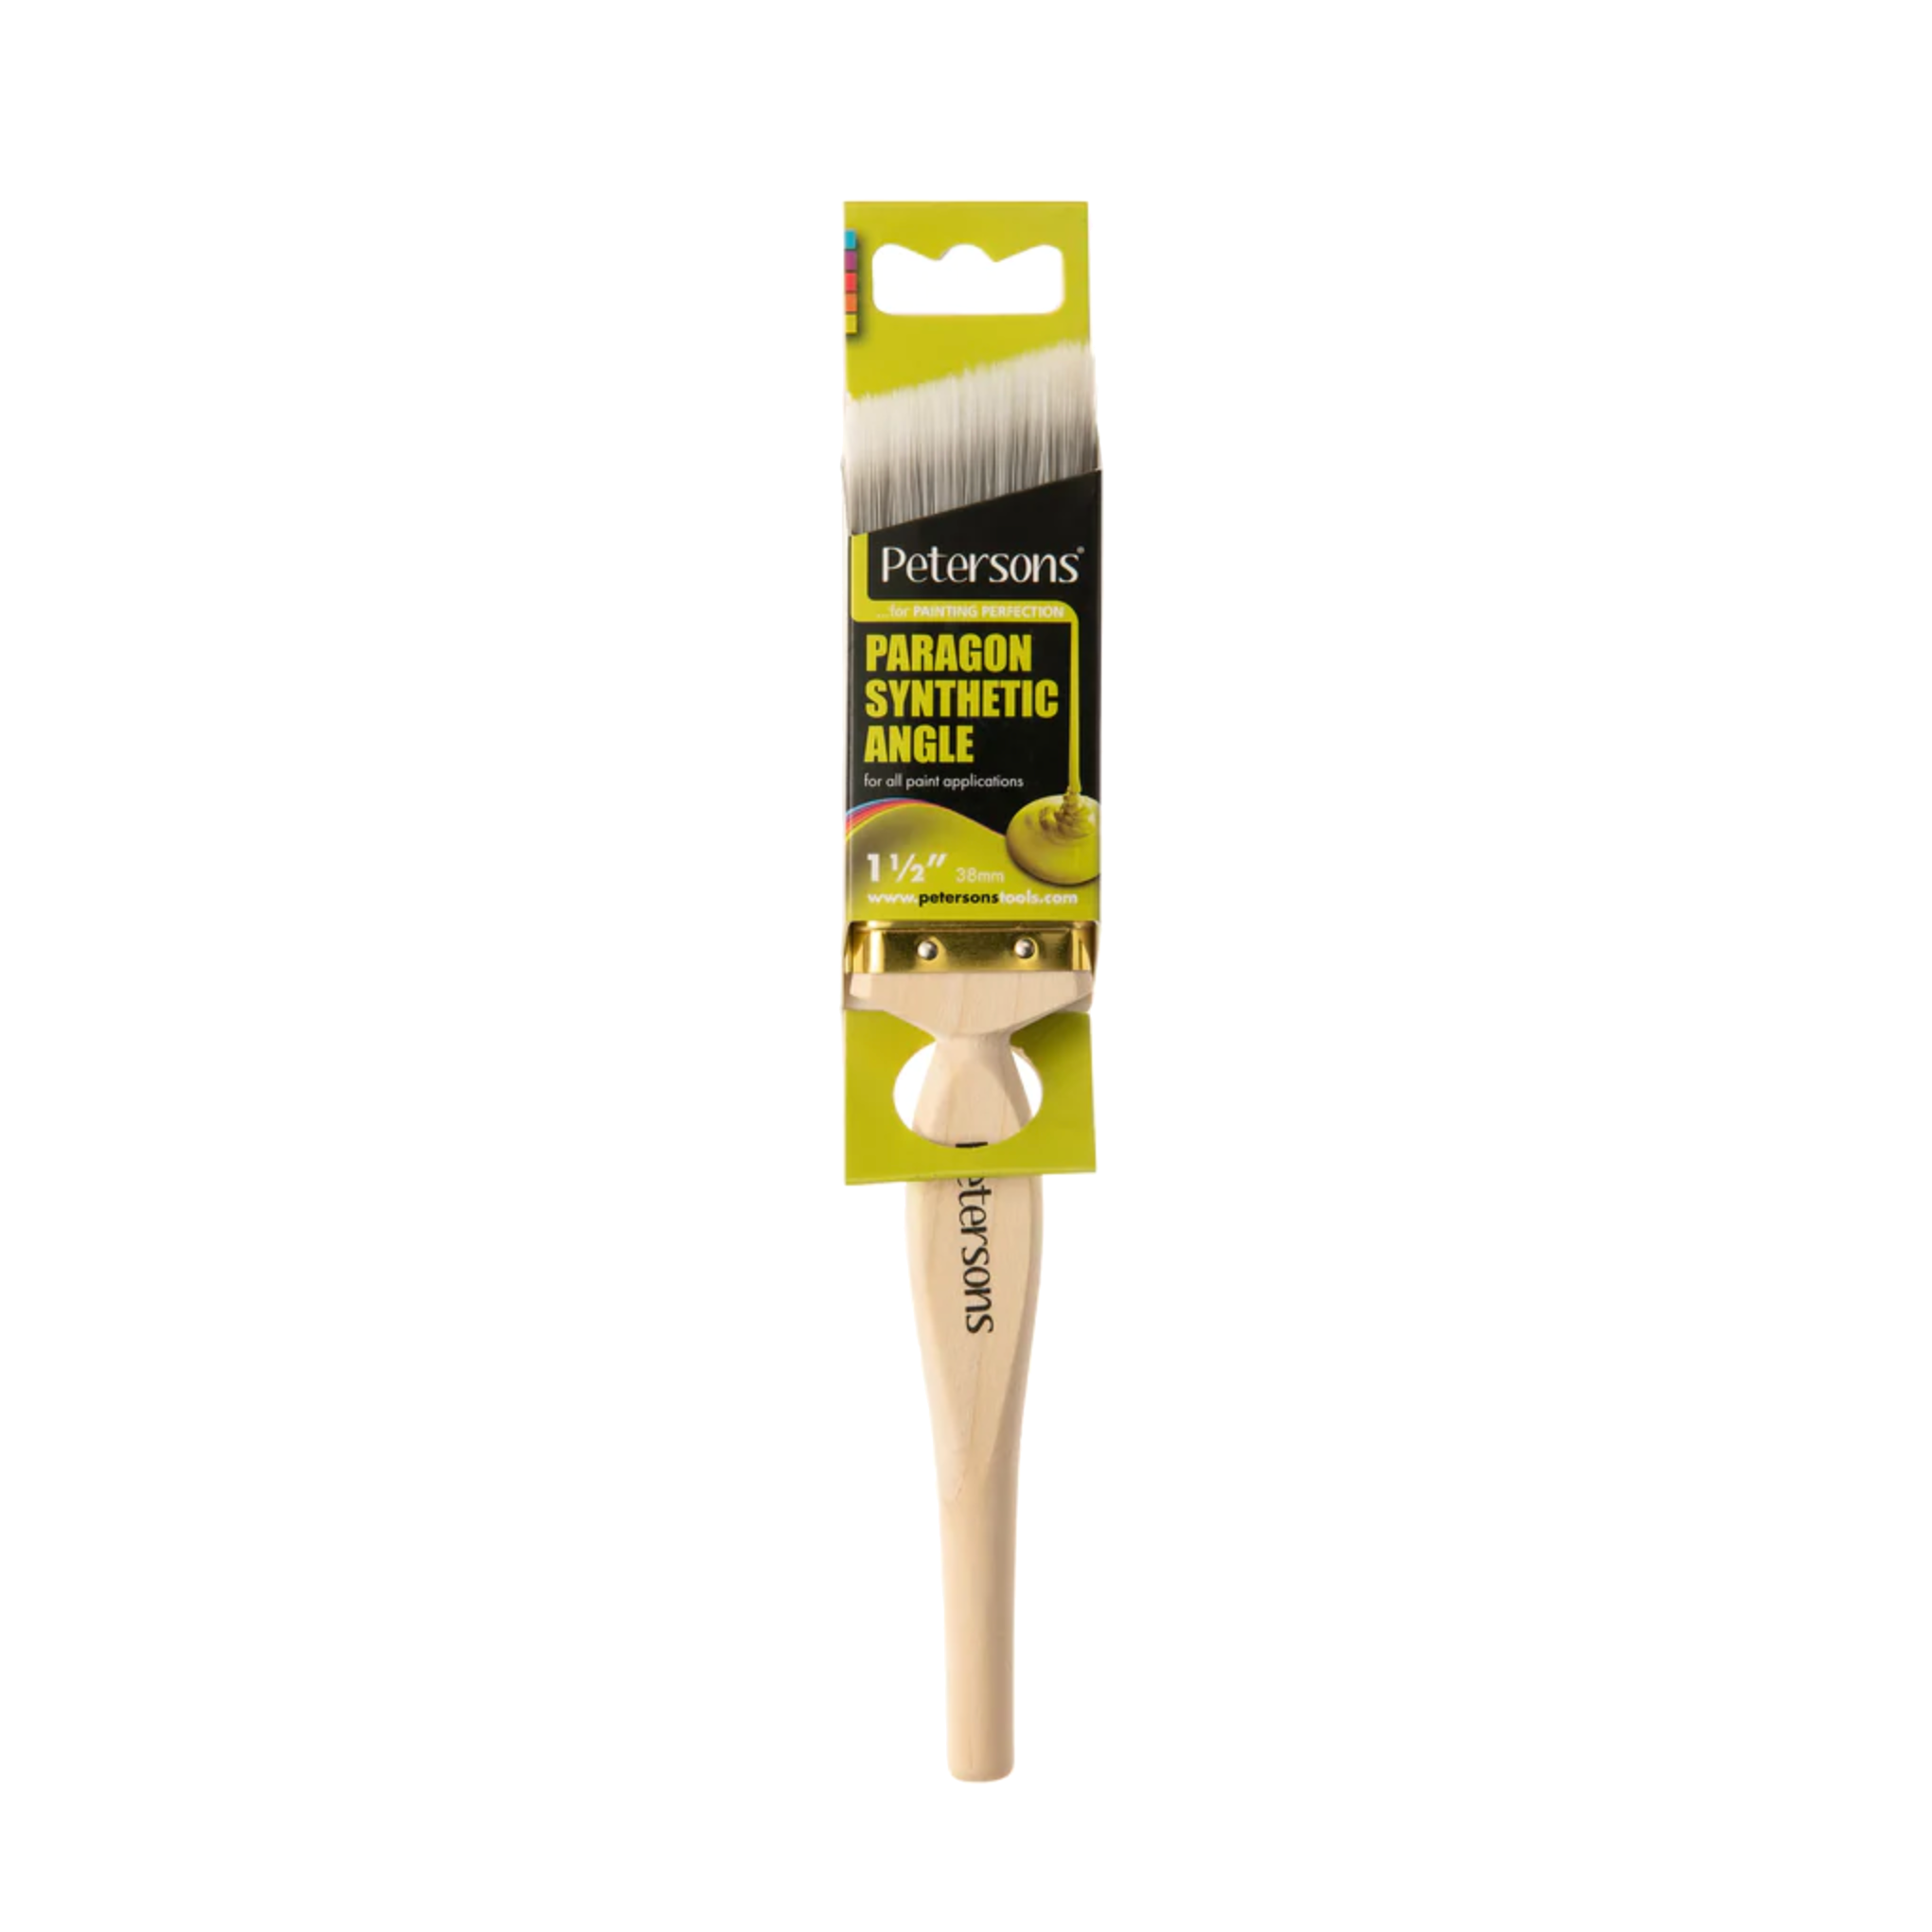 Petersons Paragon Synthetic Angle Sash Paint Brush